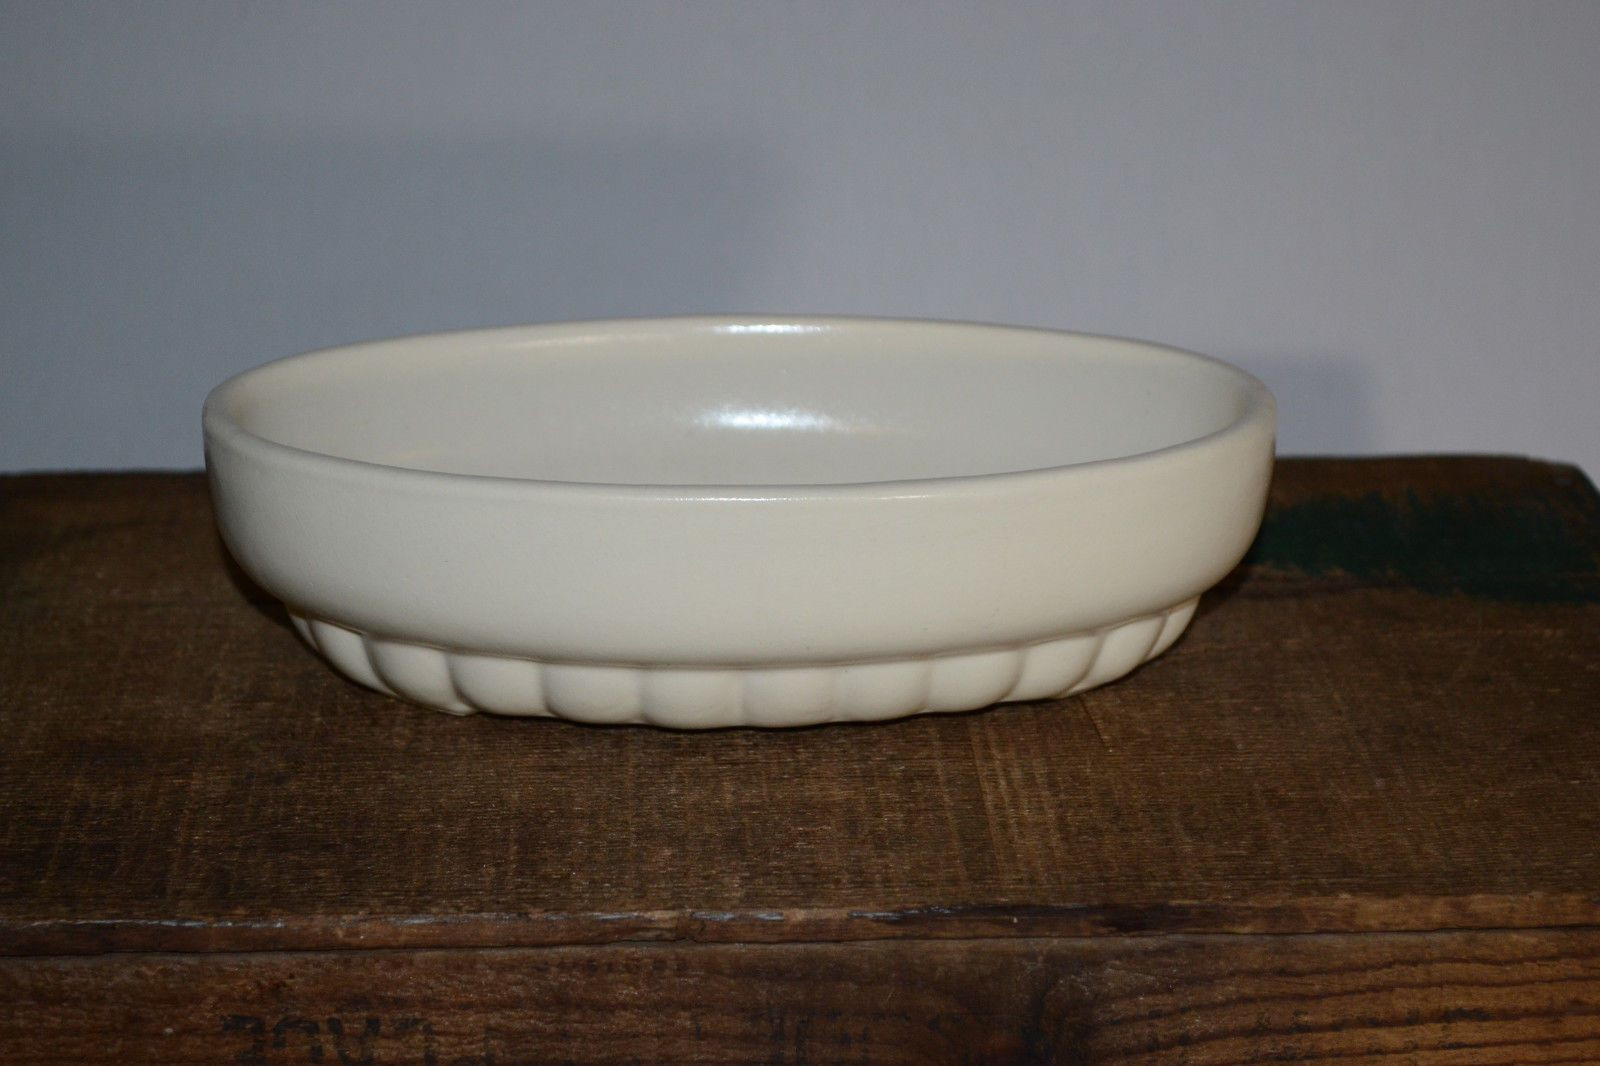 10 Recommended Royal Haeger White Vase 2024 free download royal haeger white vase of vintage royal haeger white dish bowl planter nice condition within vintage royal haeger white dish bowl planter nice condition pottery glass pottery